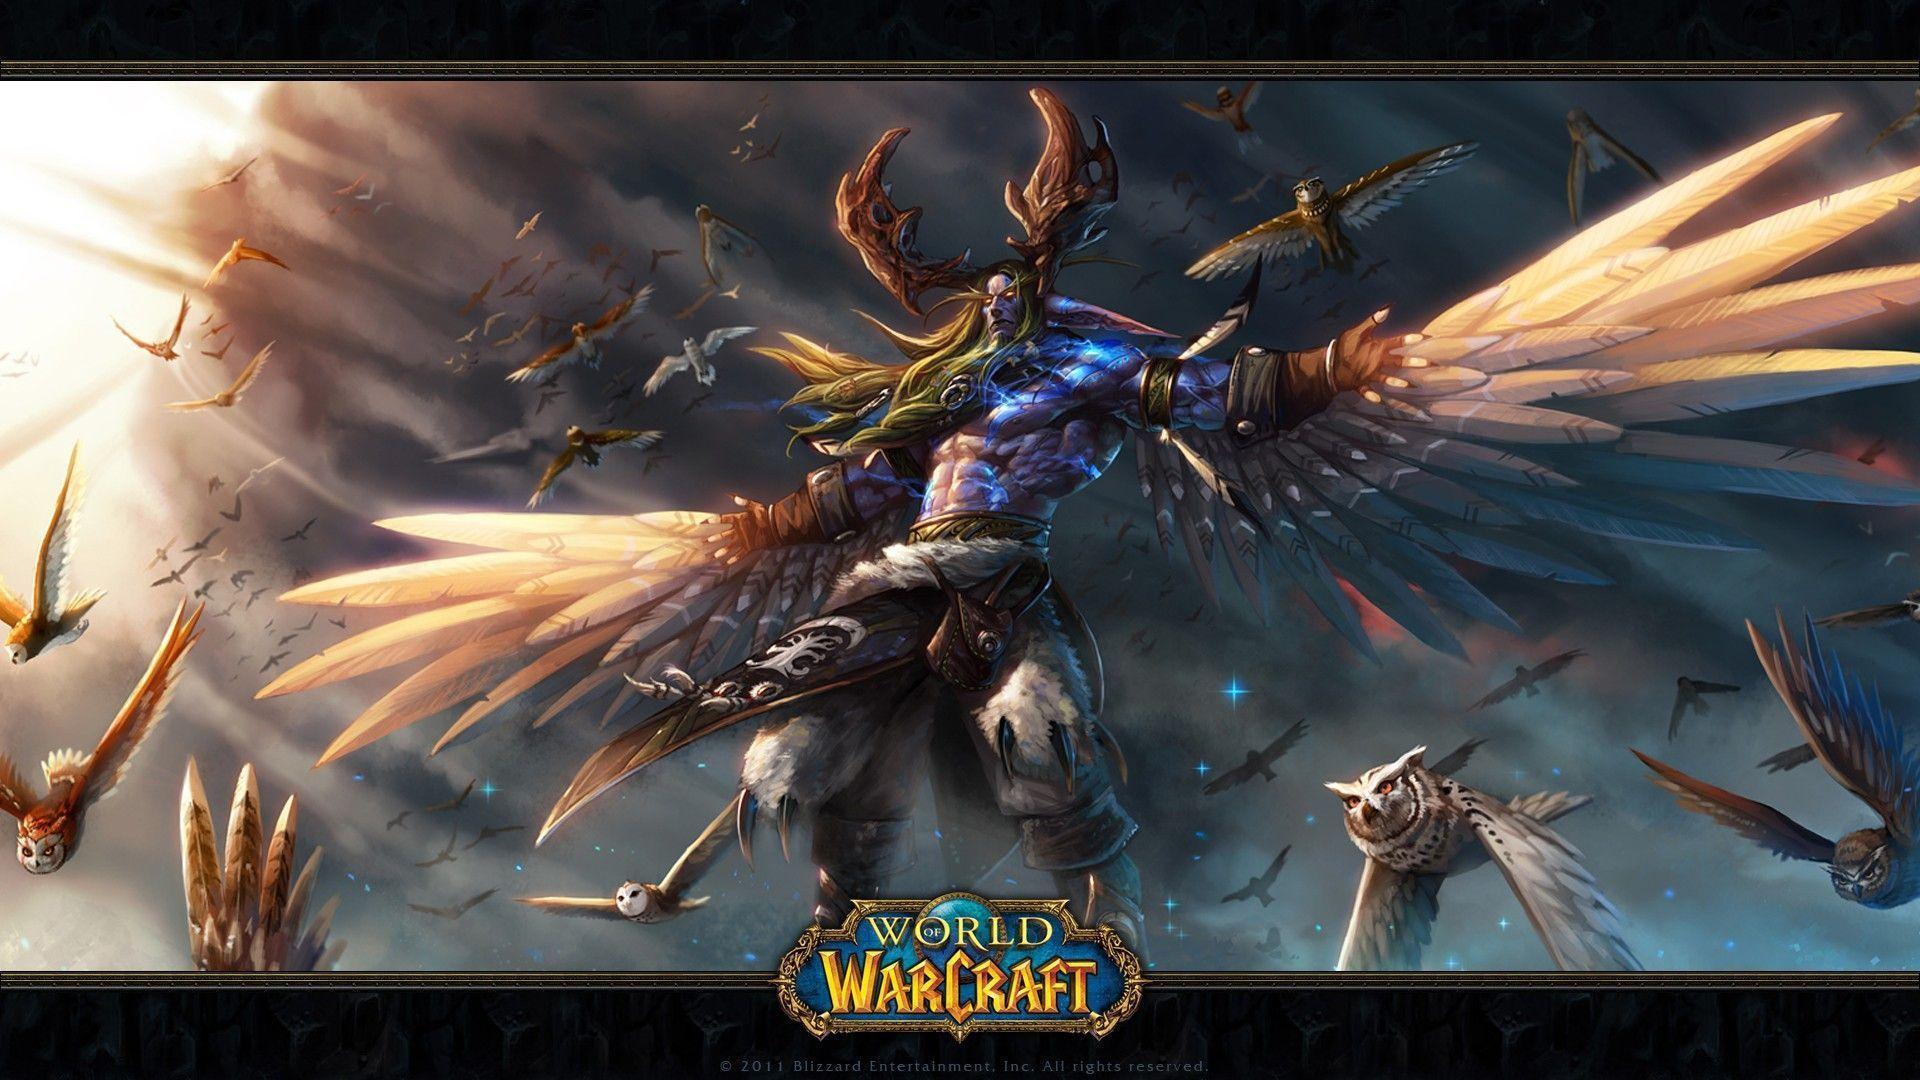 The Image of Video Games World Of Warcraft Blizzard Entertainment